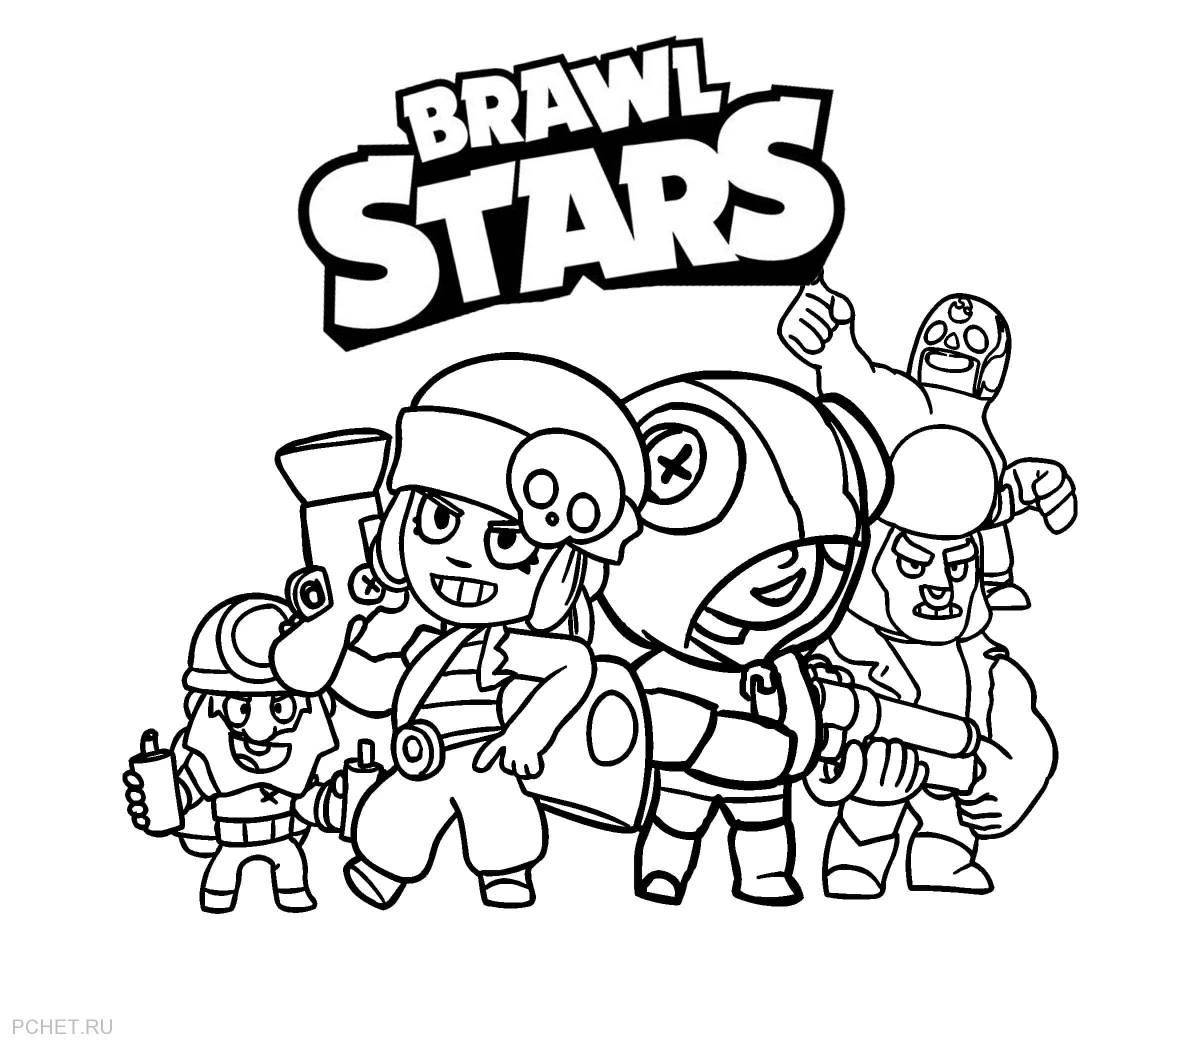 Glorious brave stars coloring pages for children